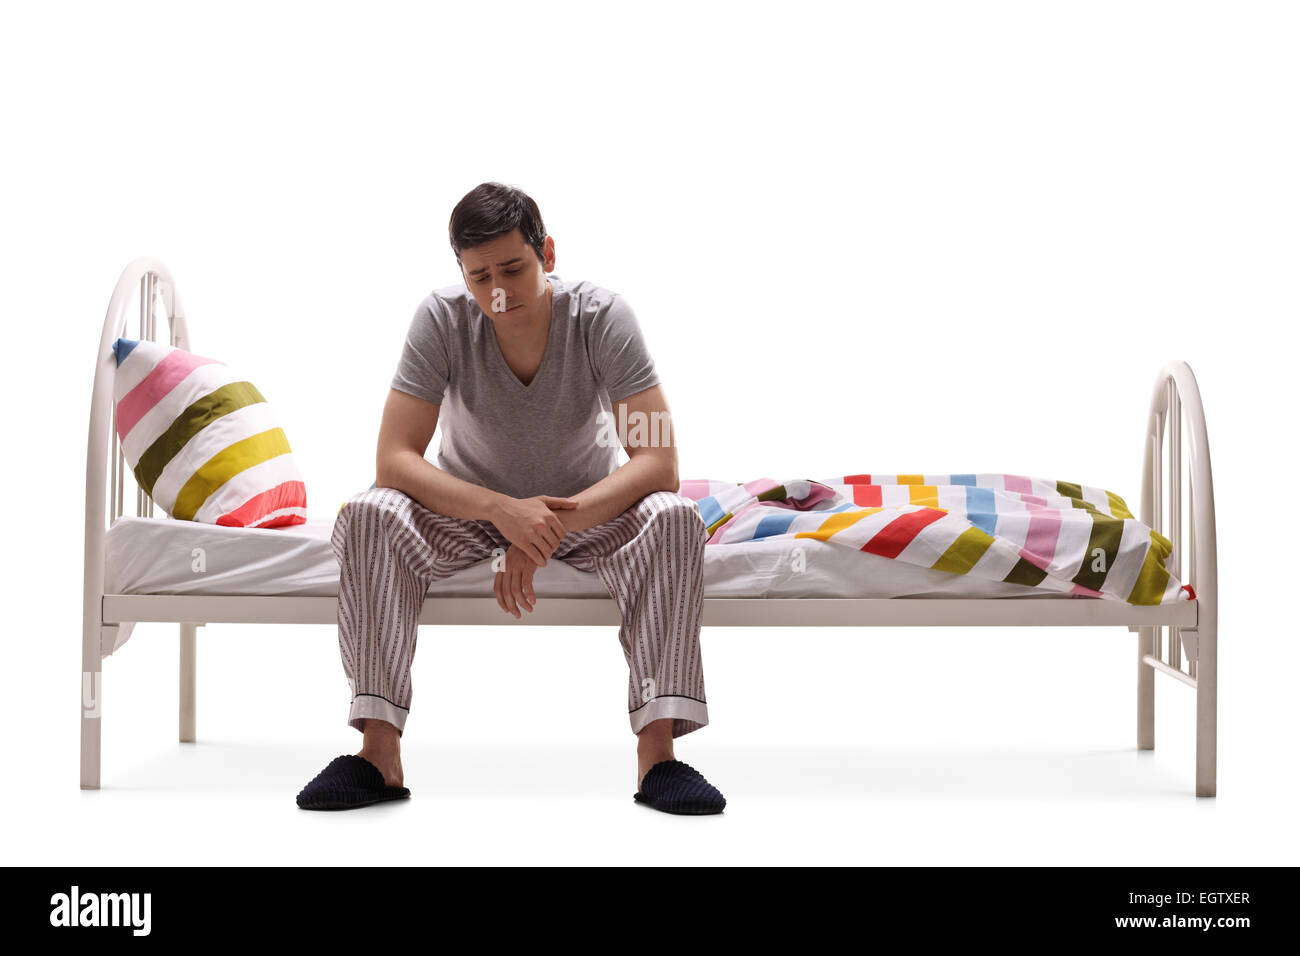 Sad man in pajamas sitting on a bed isolated on white background Stock Photo